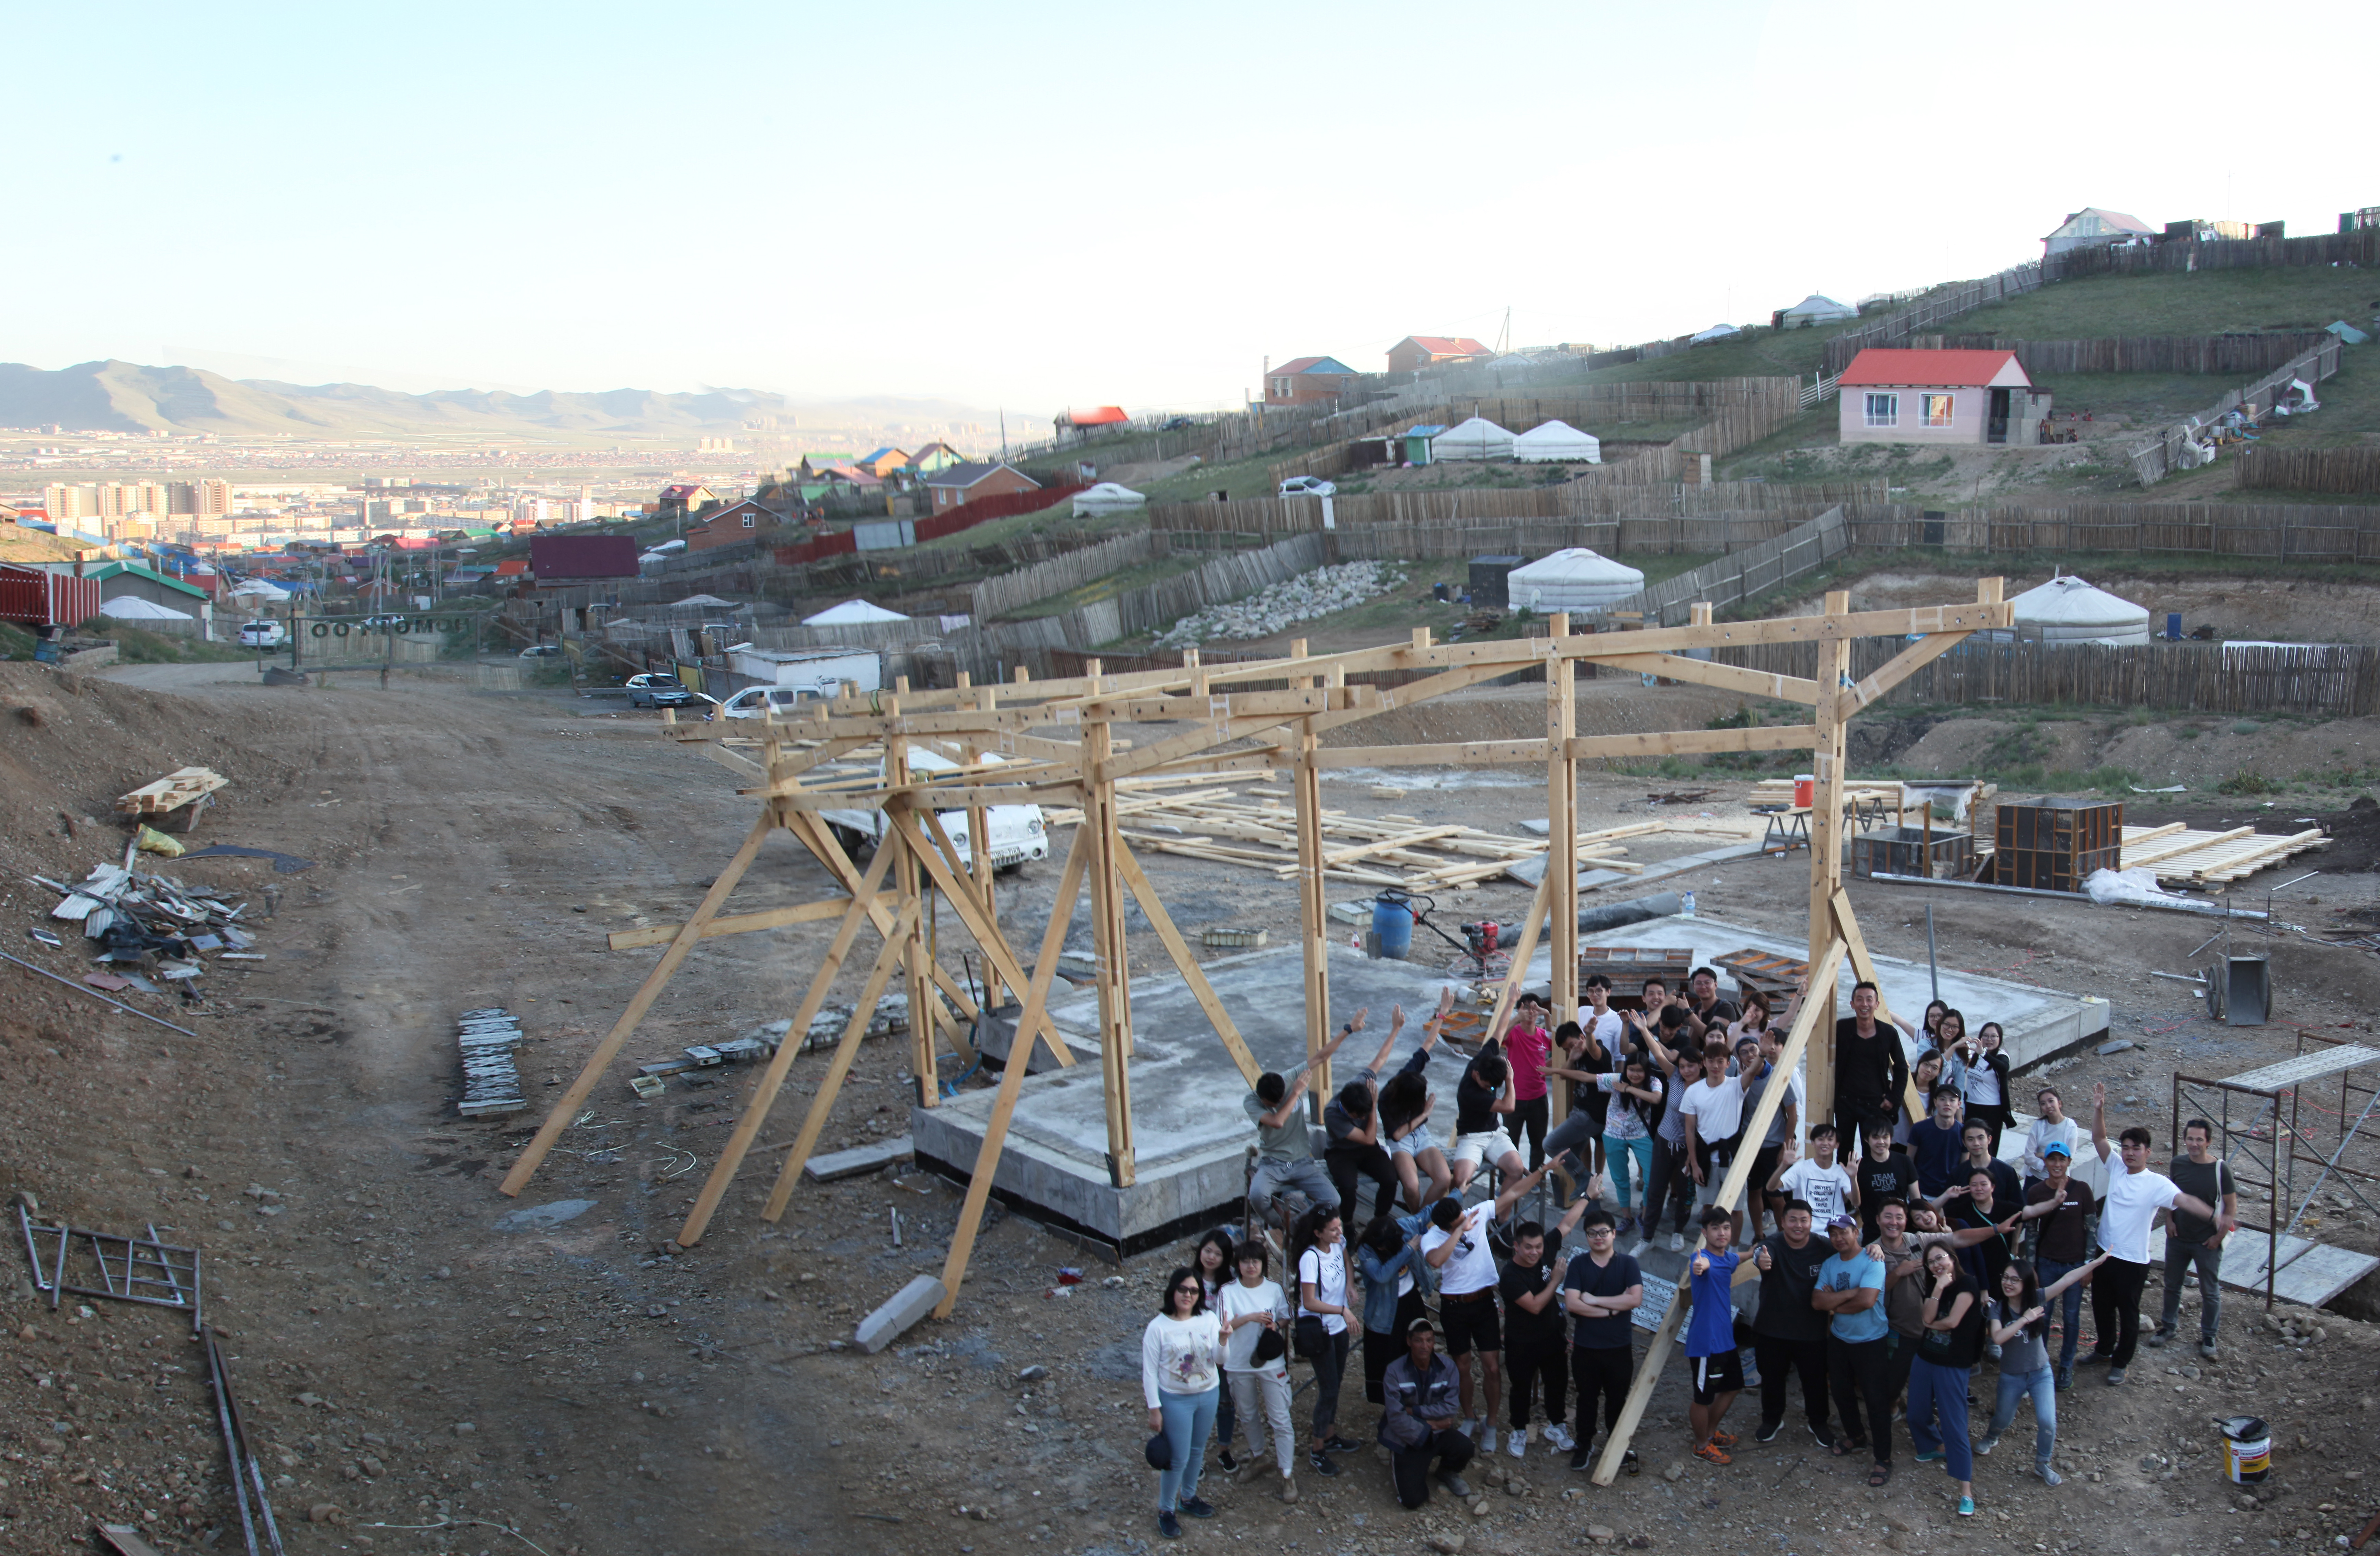  Students amassed in a construction site next to a partially constructed wooden framework. Individual ger plots can be seen on the hills in the distance. 